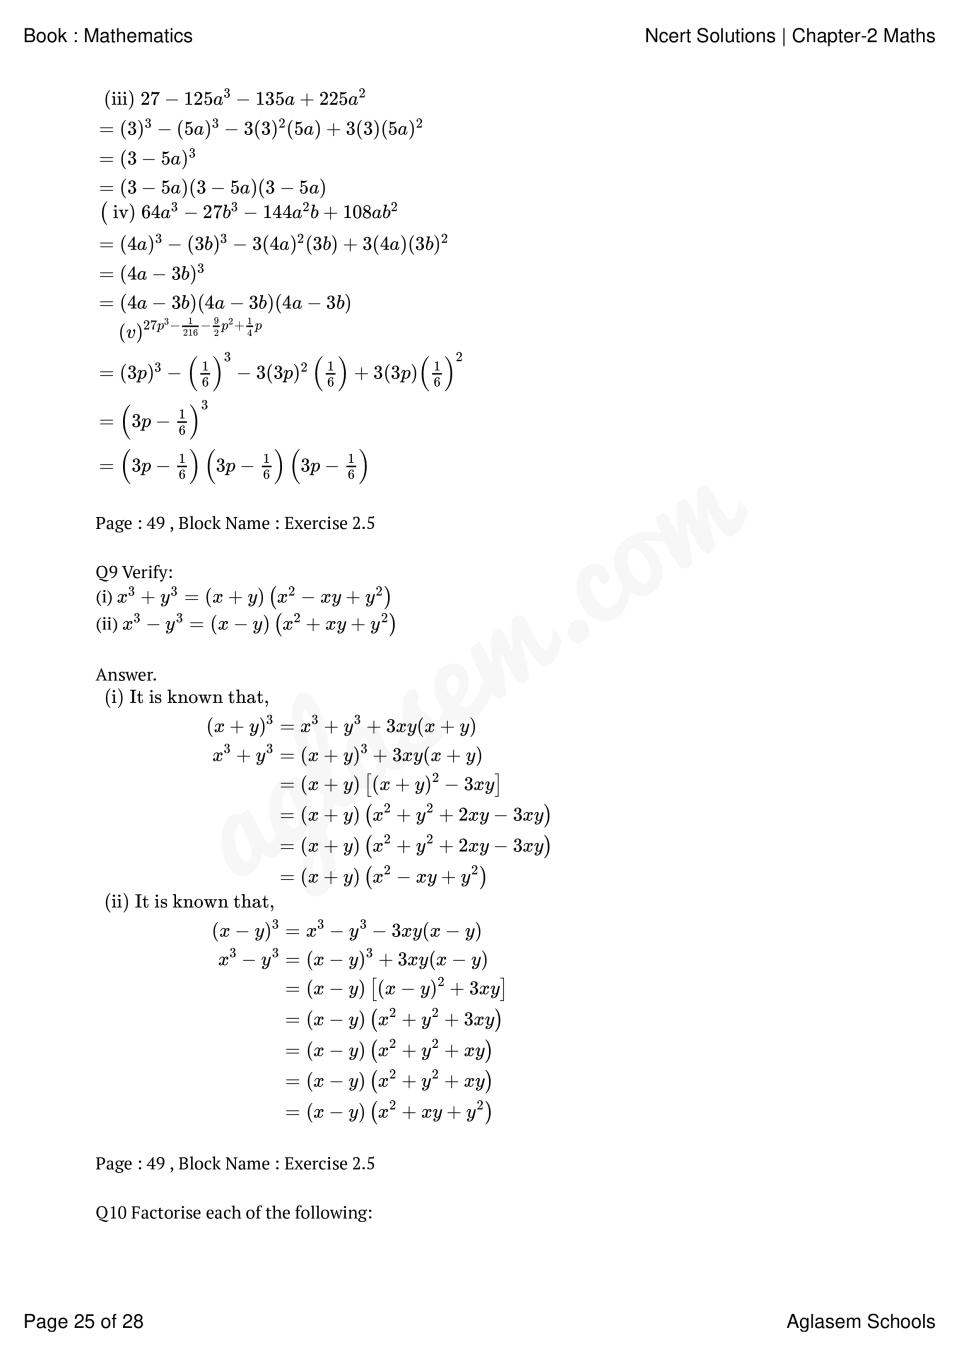 Ncert Solutions For Class 9 Maths Chapter 2 Polynomials Aglasem Schools